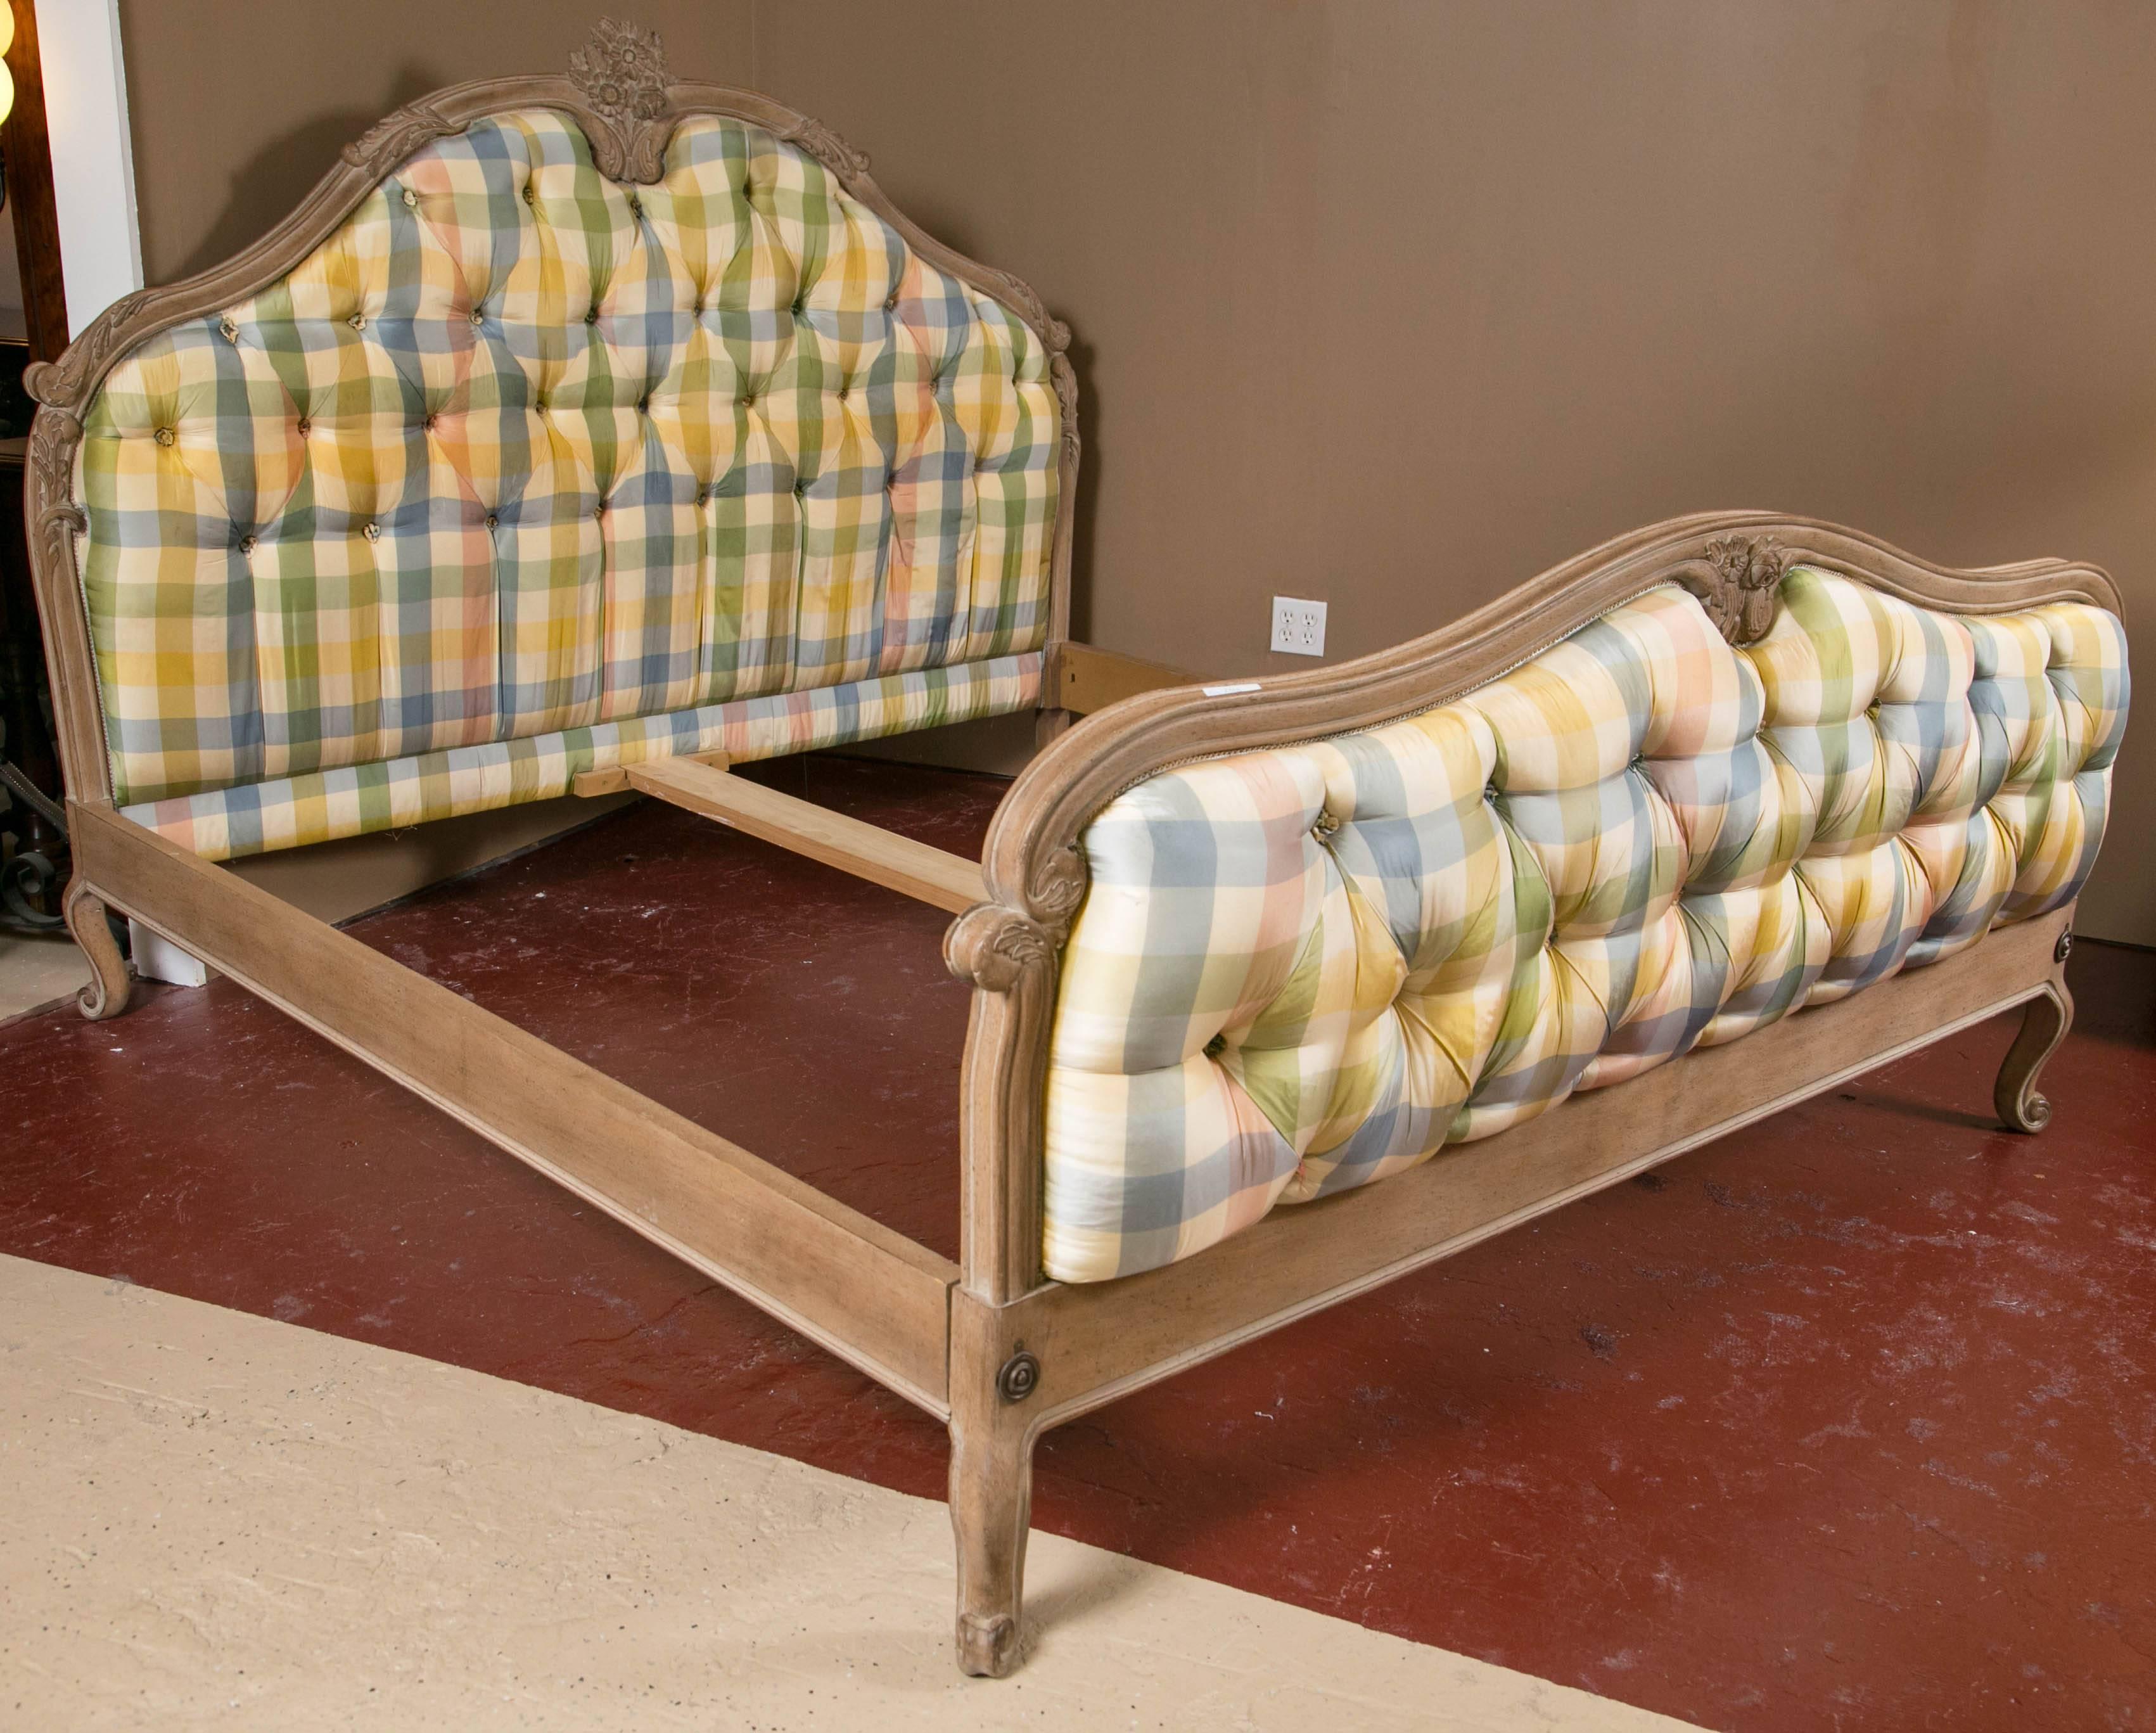 A king-sized Louis XV style country French bed. Custom quality by Don Rousseau, This fun checkered upholstered in light pastel colors headboard and foot-board is tufted and sits on a thick and supportive Louis XV Styled frame. The fame with a center